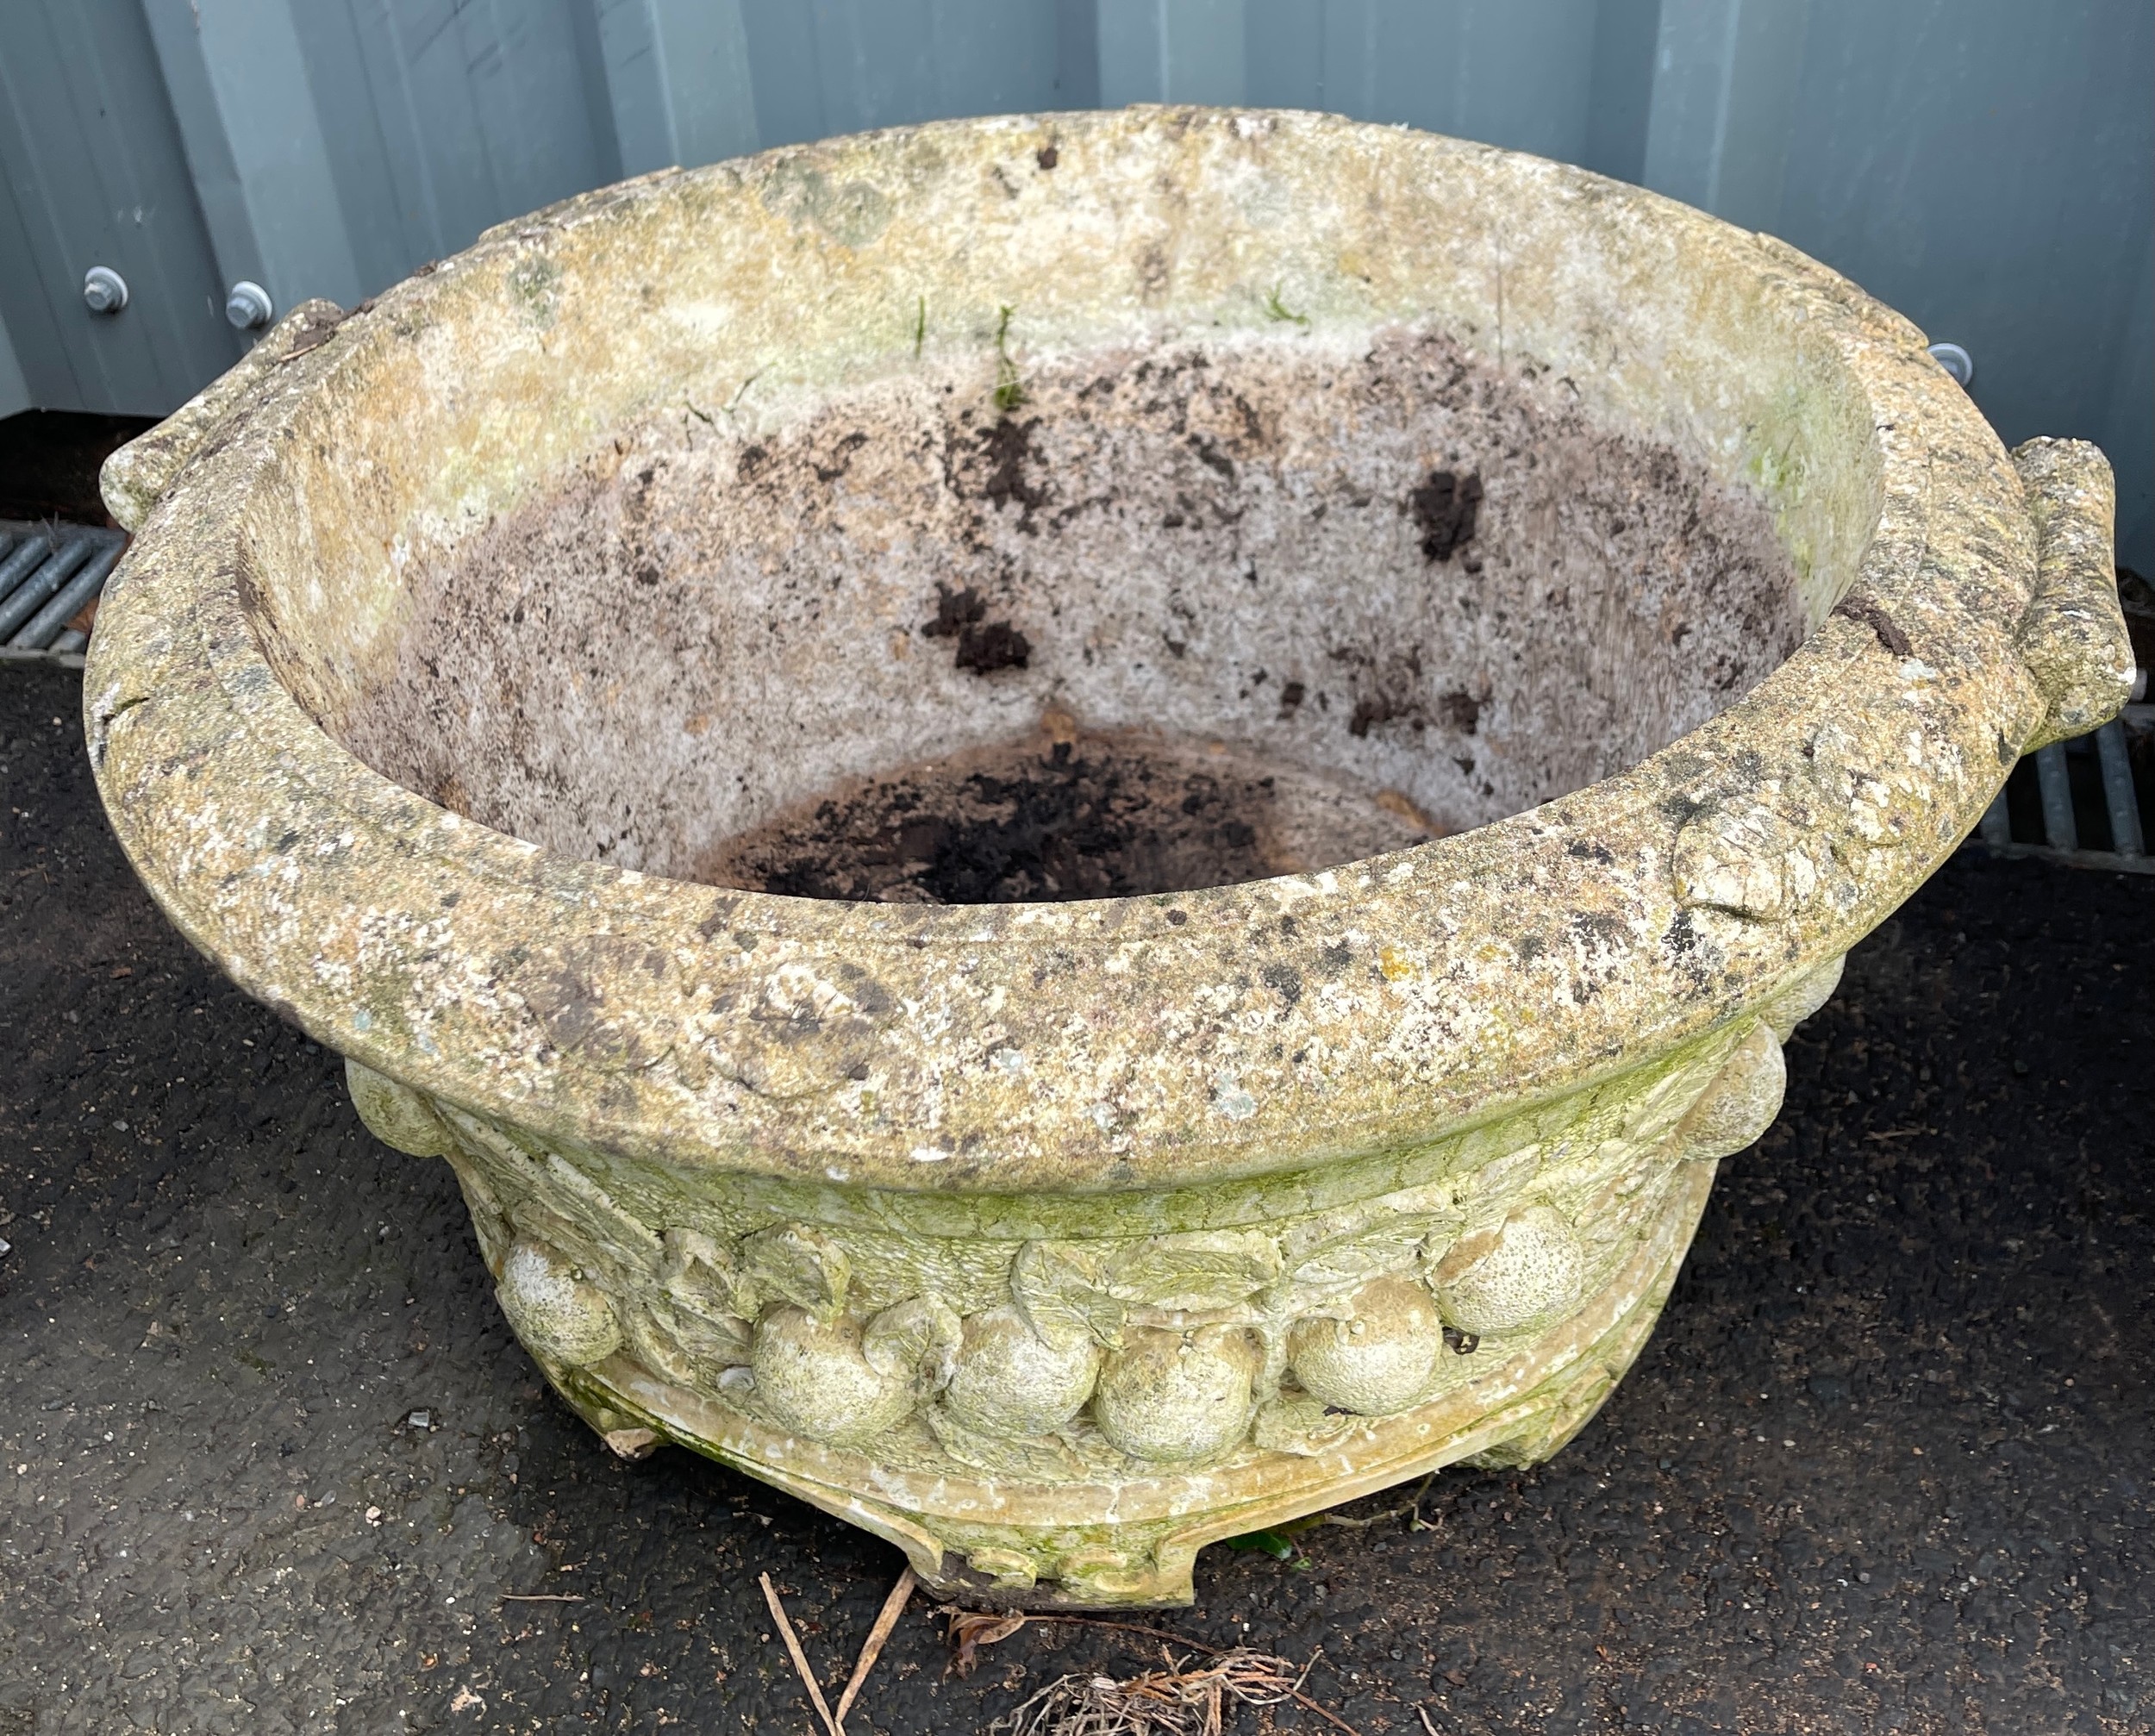 Concrete planter, approximate measurements Height 12 inches, Diameter 22 inches